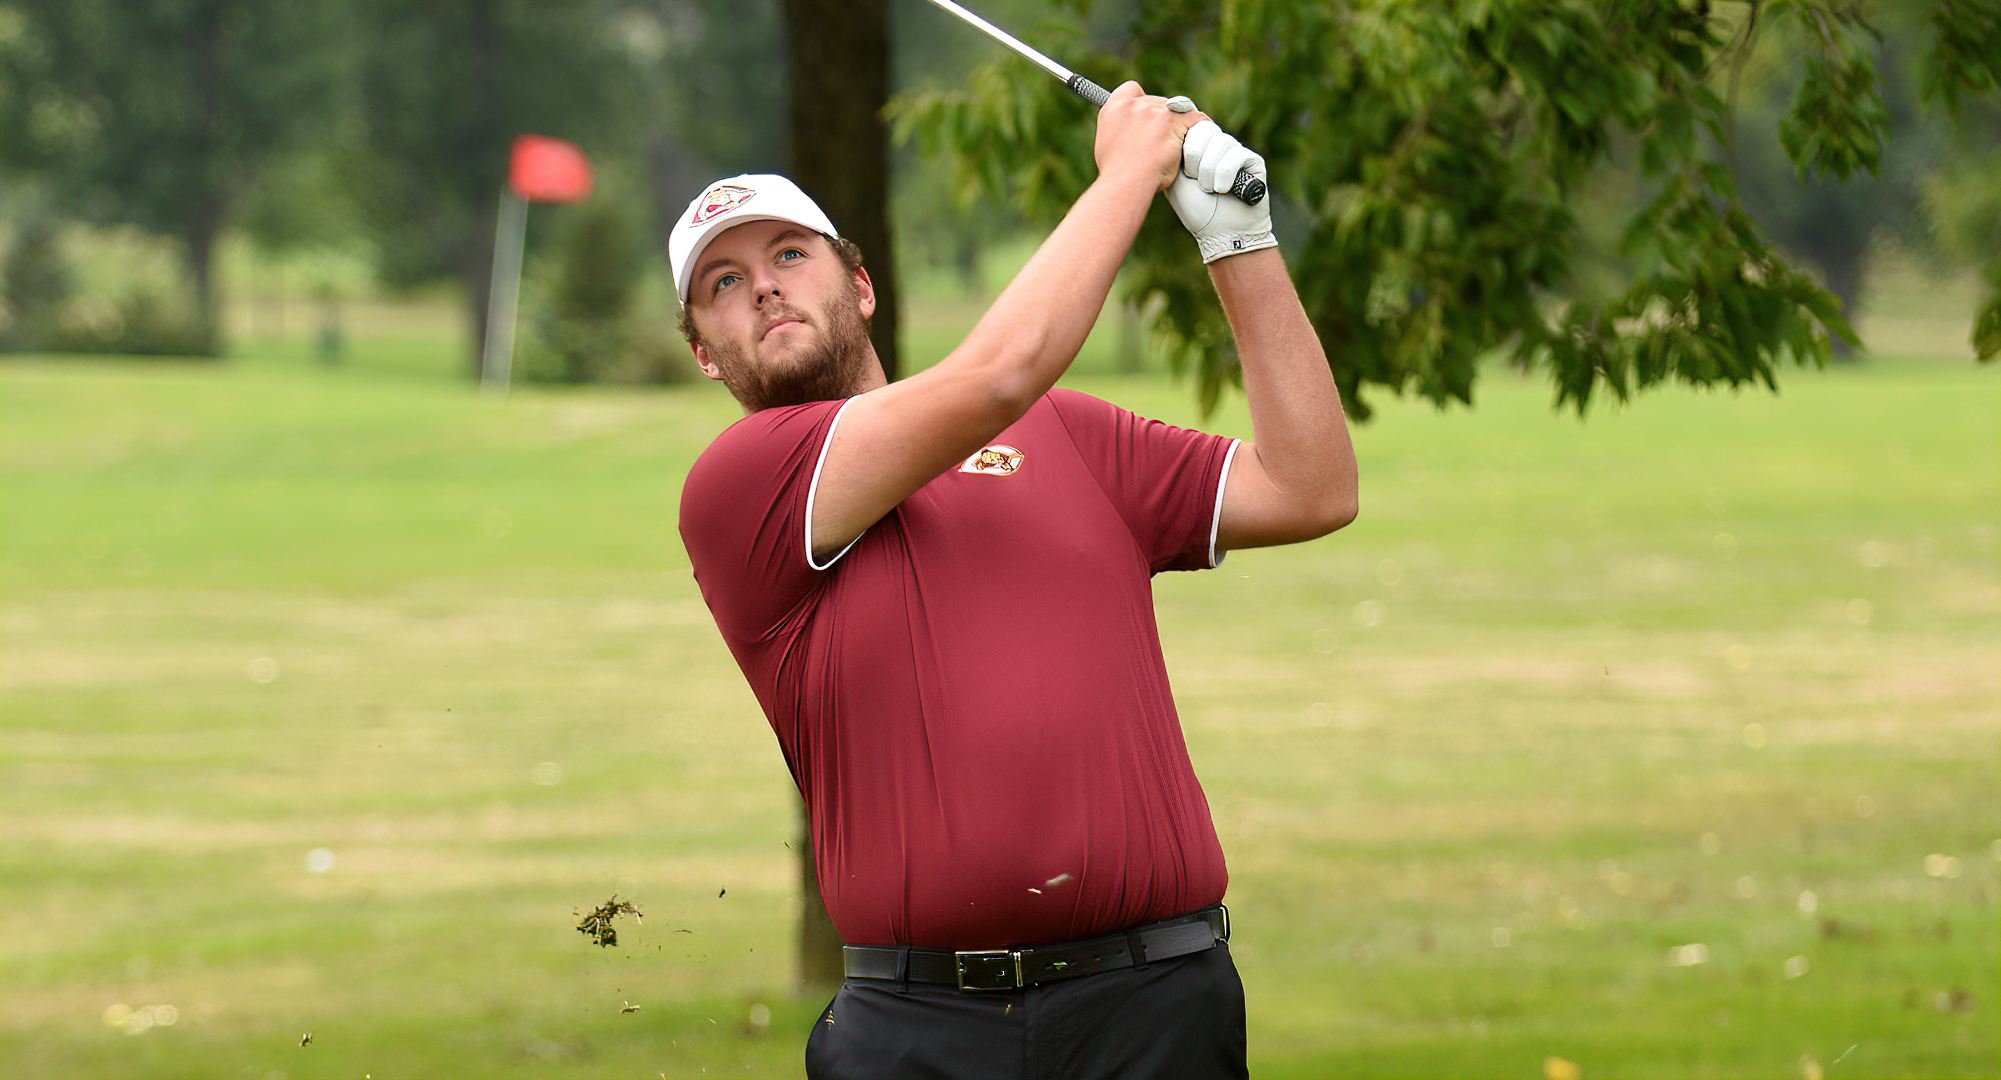 Super senior Mason Opheim posted his fourth Top 10 finish in the last five tournaments as he placed ninth and led the Cobbers to a 4th-place finish at the SJU Invitational.